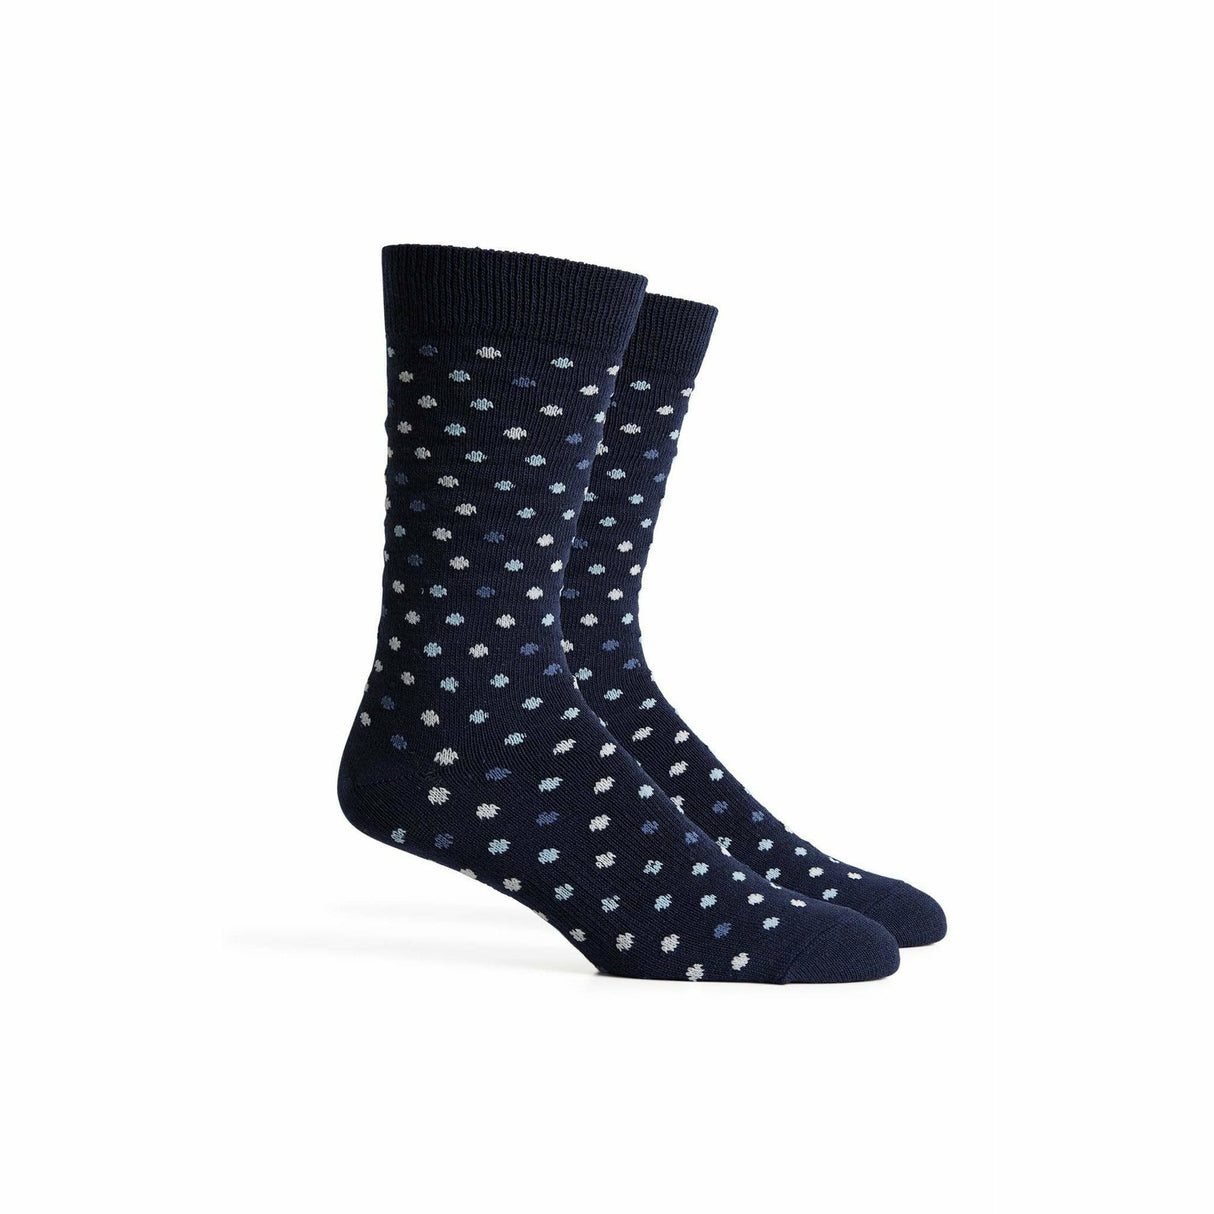 Richer Poorer Mens Confetti Crew Socks  -  One Size Fits Most / Blue Nights